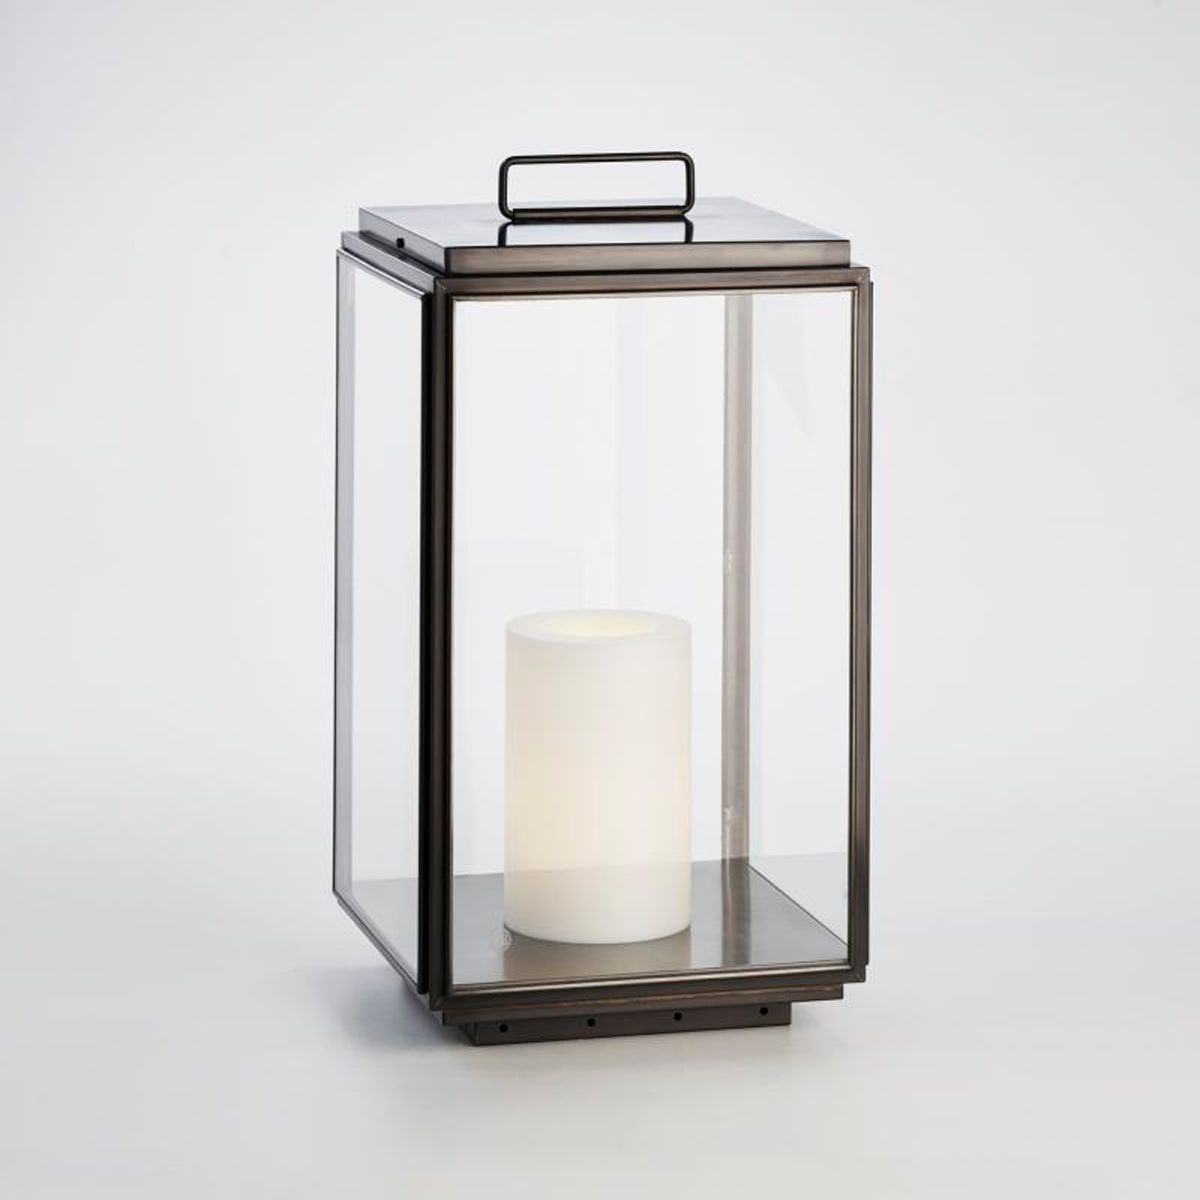 Tekna Ilford Floor Large on 230v Candle